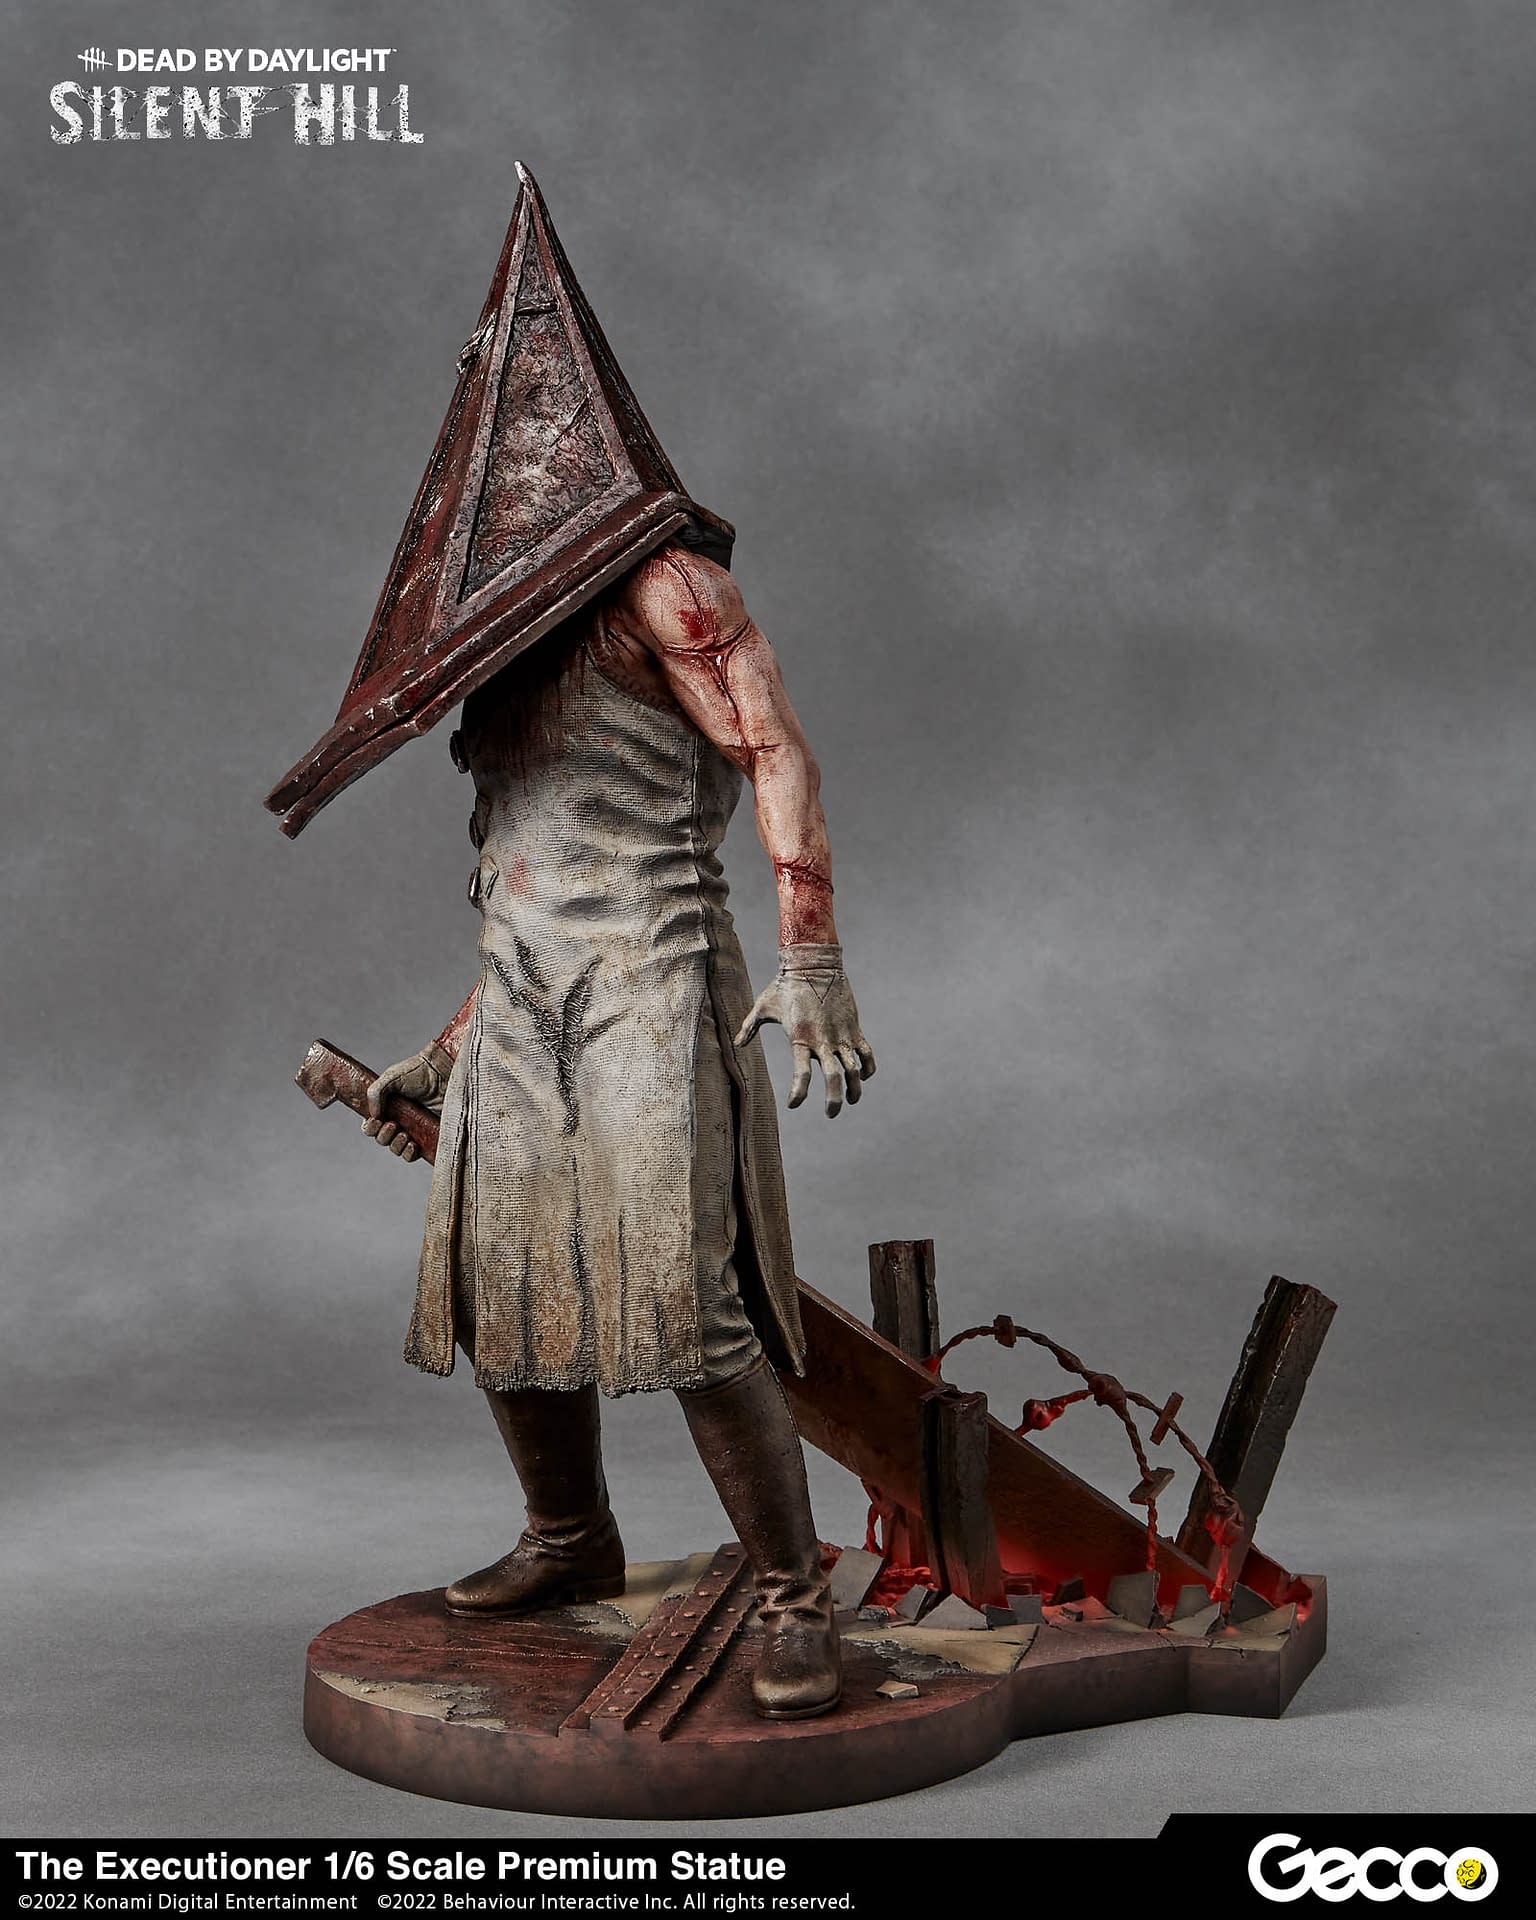 Dead by Daylight killer Pyramid Head critiqued by Silent Hill designer